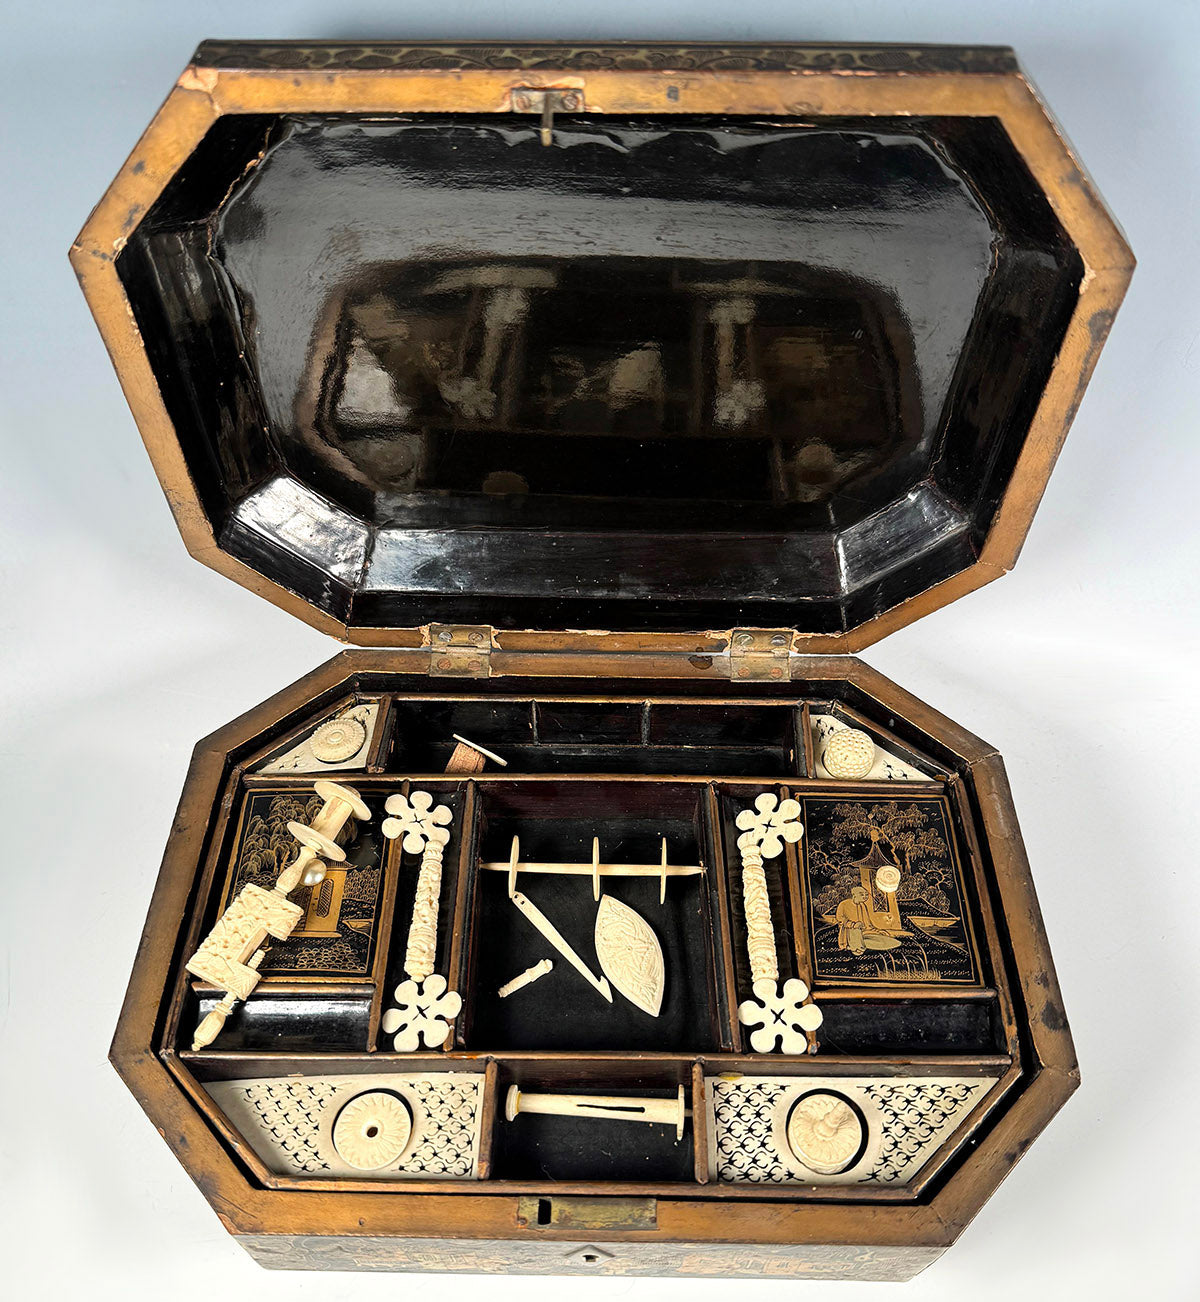 Antique Victorian Era Oriental Lacquer & Hand Painted Sewing Box, Ivory Sewing Tools include Silk Winders, Clamp, Spools, Tatting Shuttle